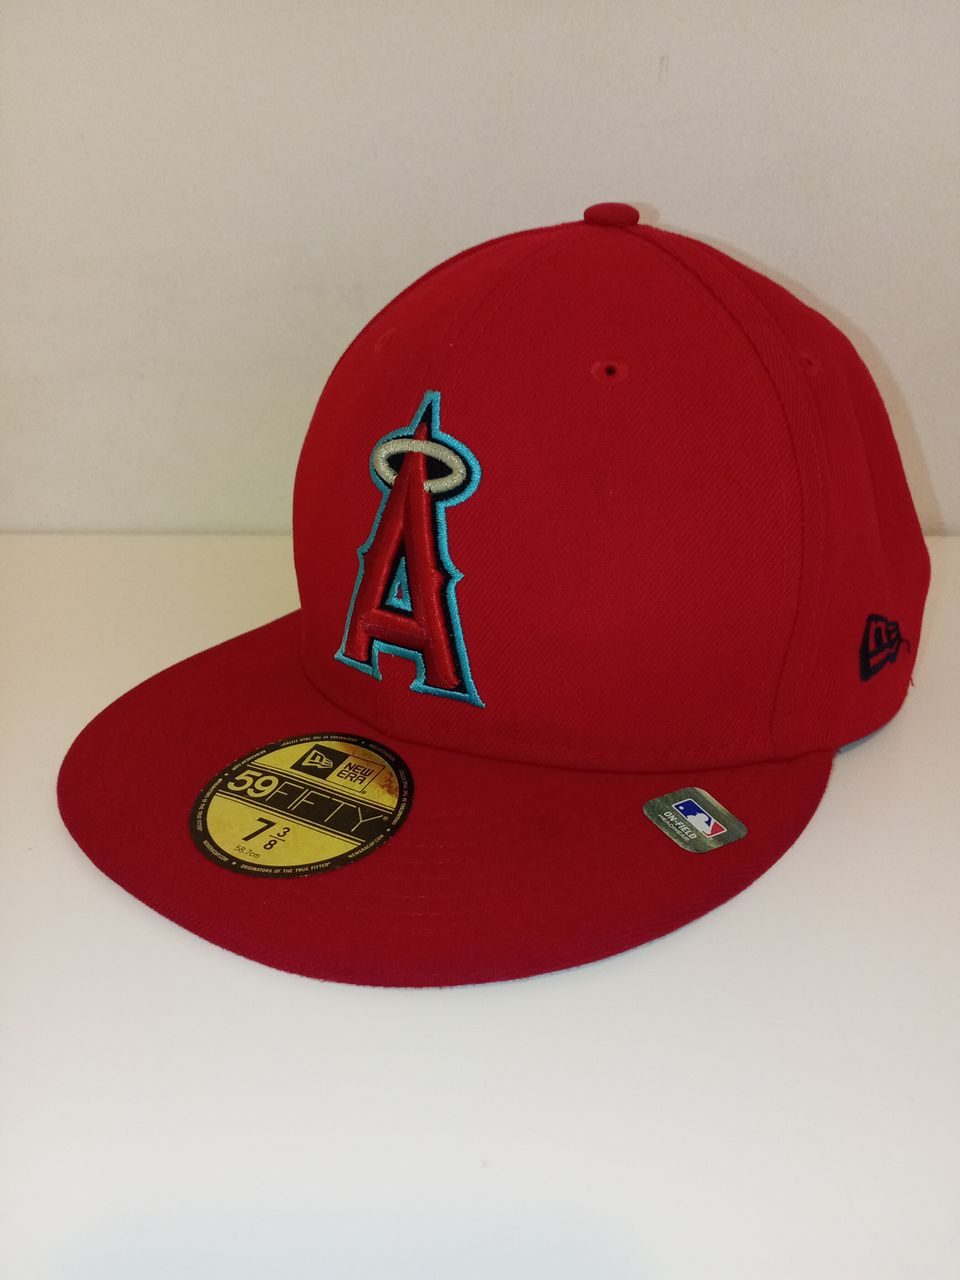 Los Angeles fitted cap